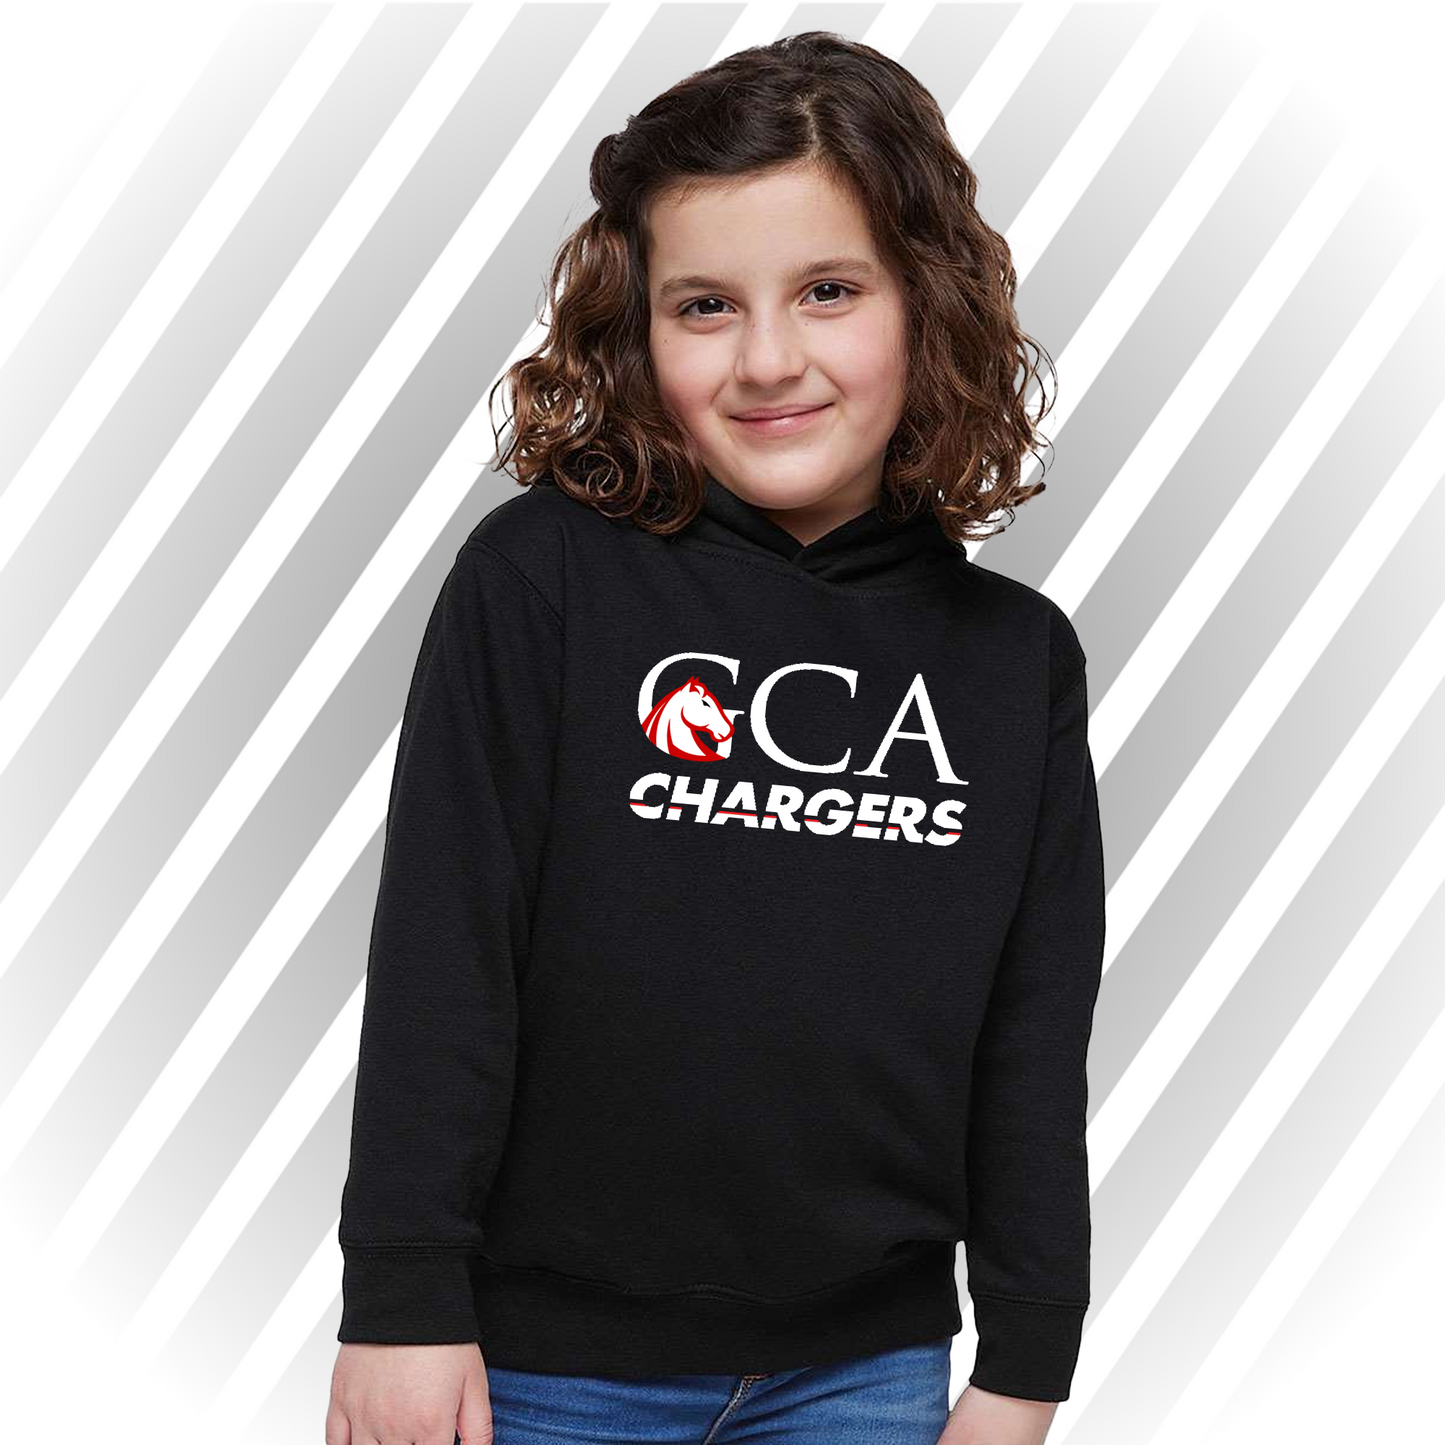 GCA Chargers - Toddler Hoodie